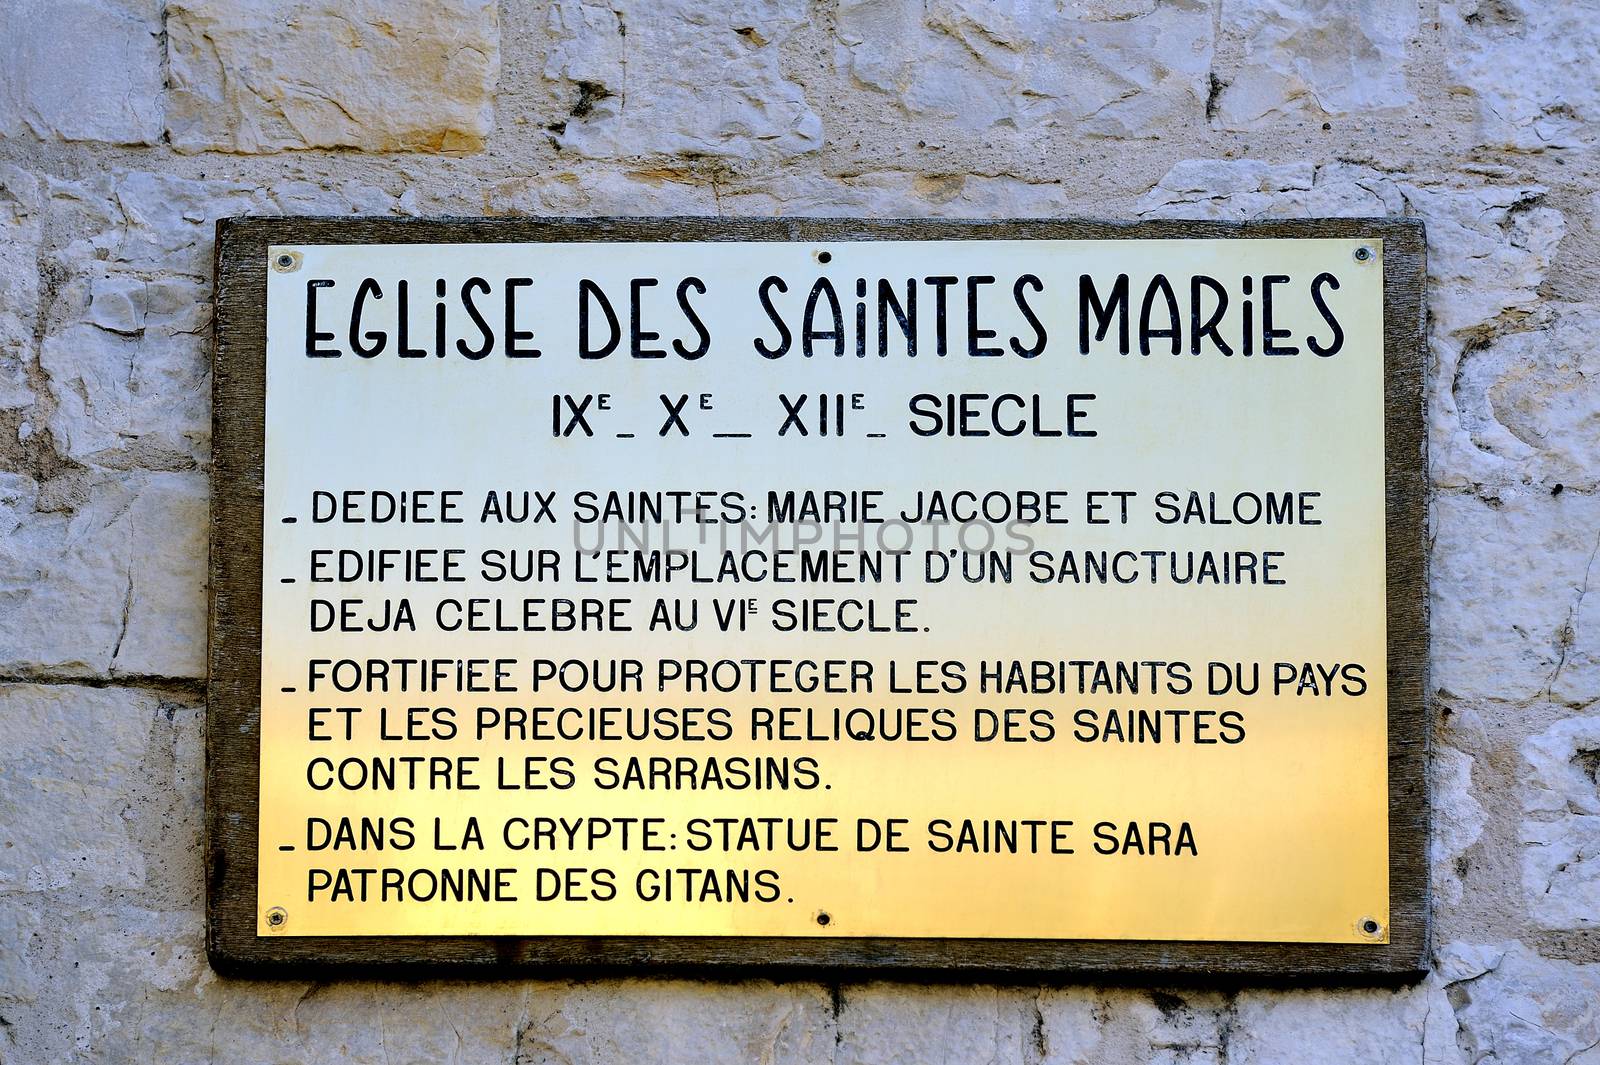 plaque explaining the history of the church of Saintes-Maries-de by gillespaire